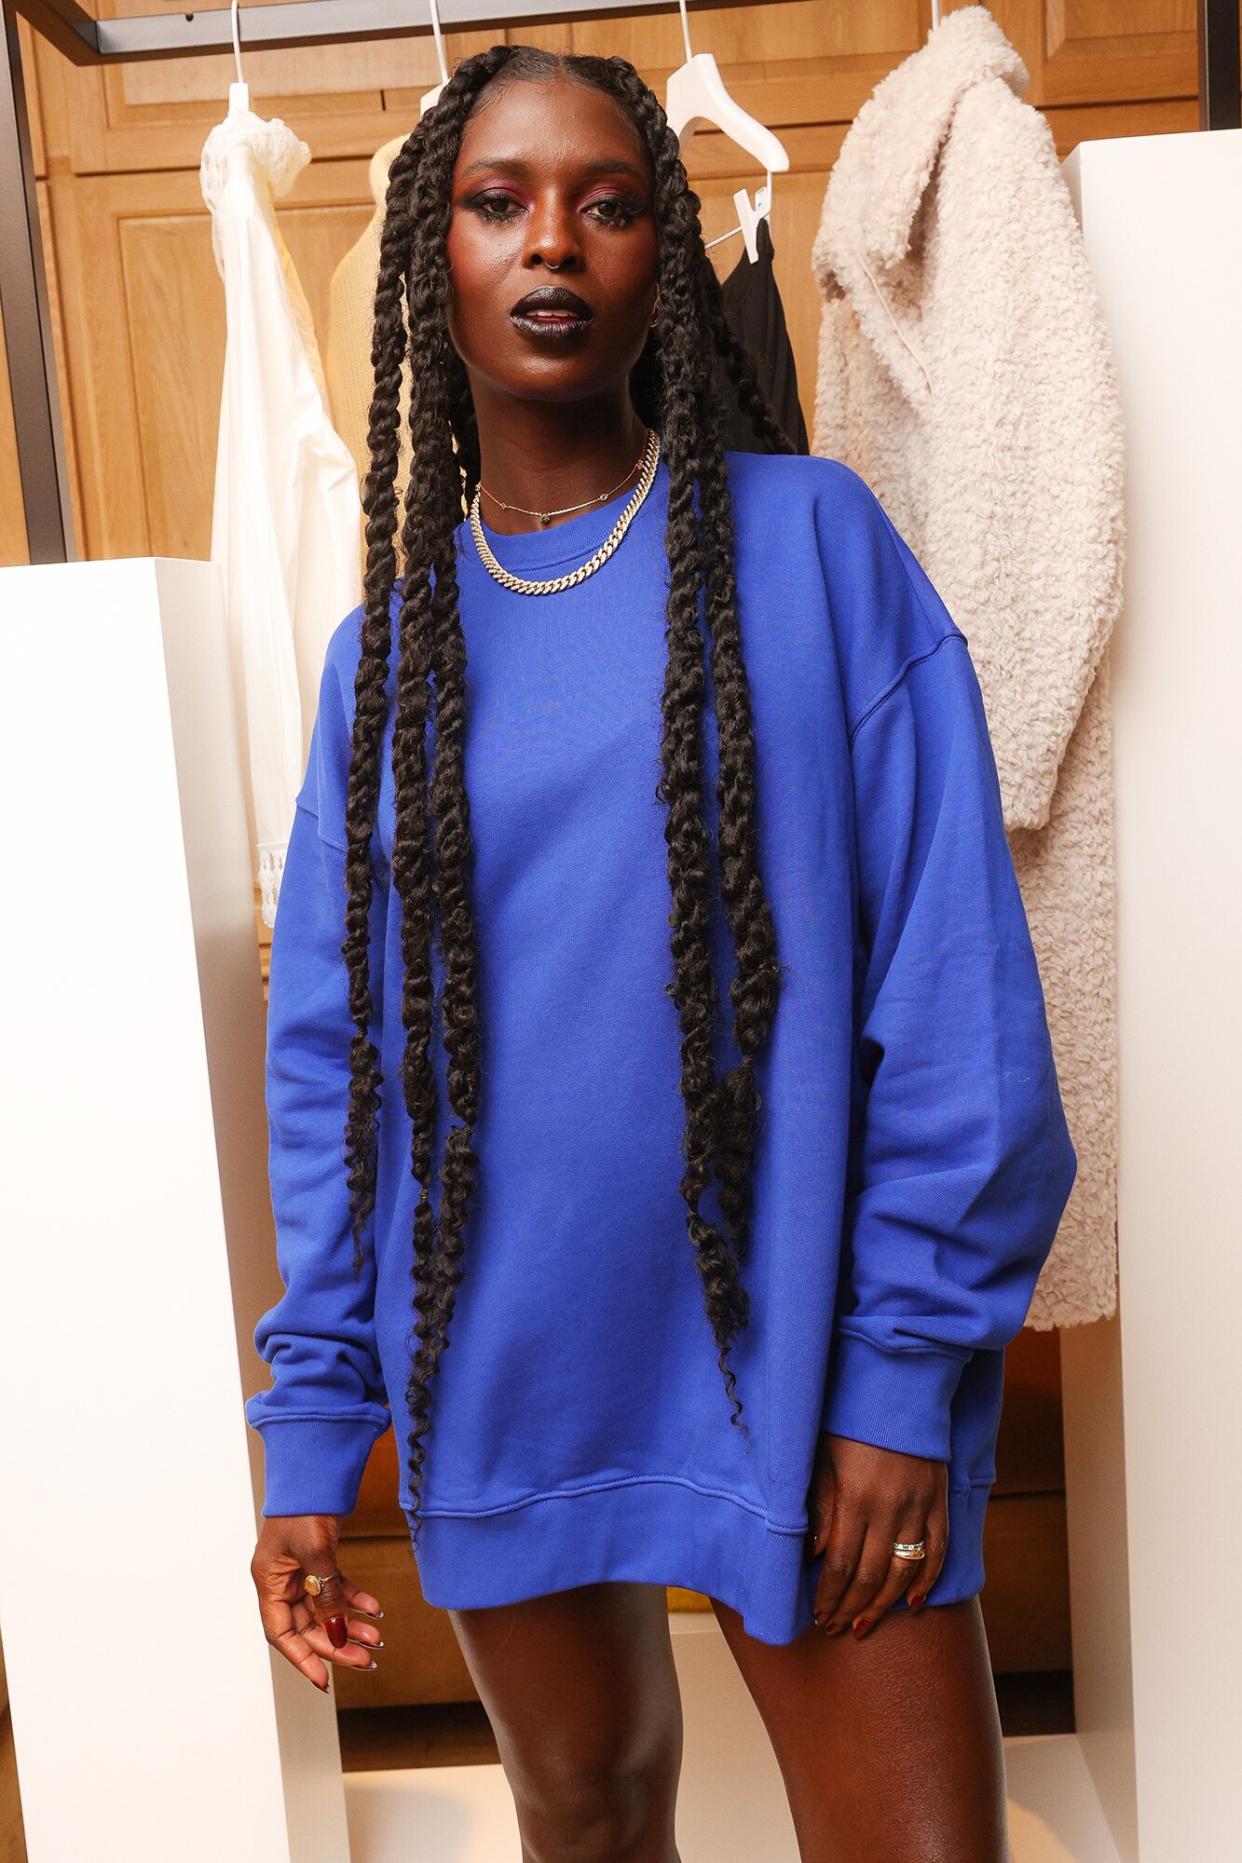 Jodie Turner-Smith attends An Evening with COS Hosted by Jodie Turner-Smith at San Vicente Bungalows in West Hollywood on October 14, 2021